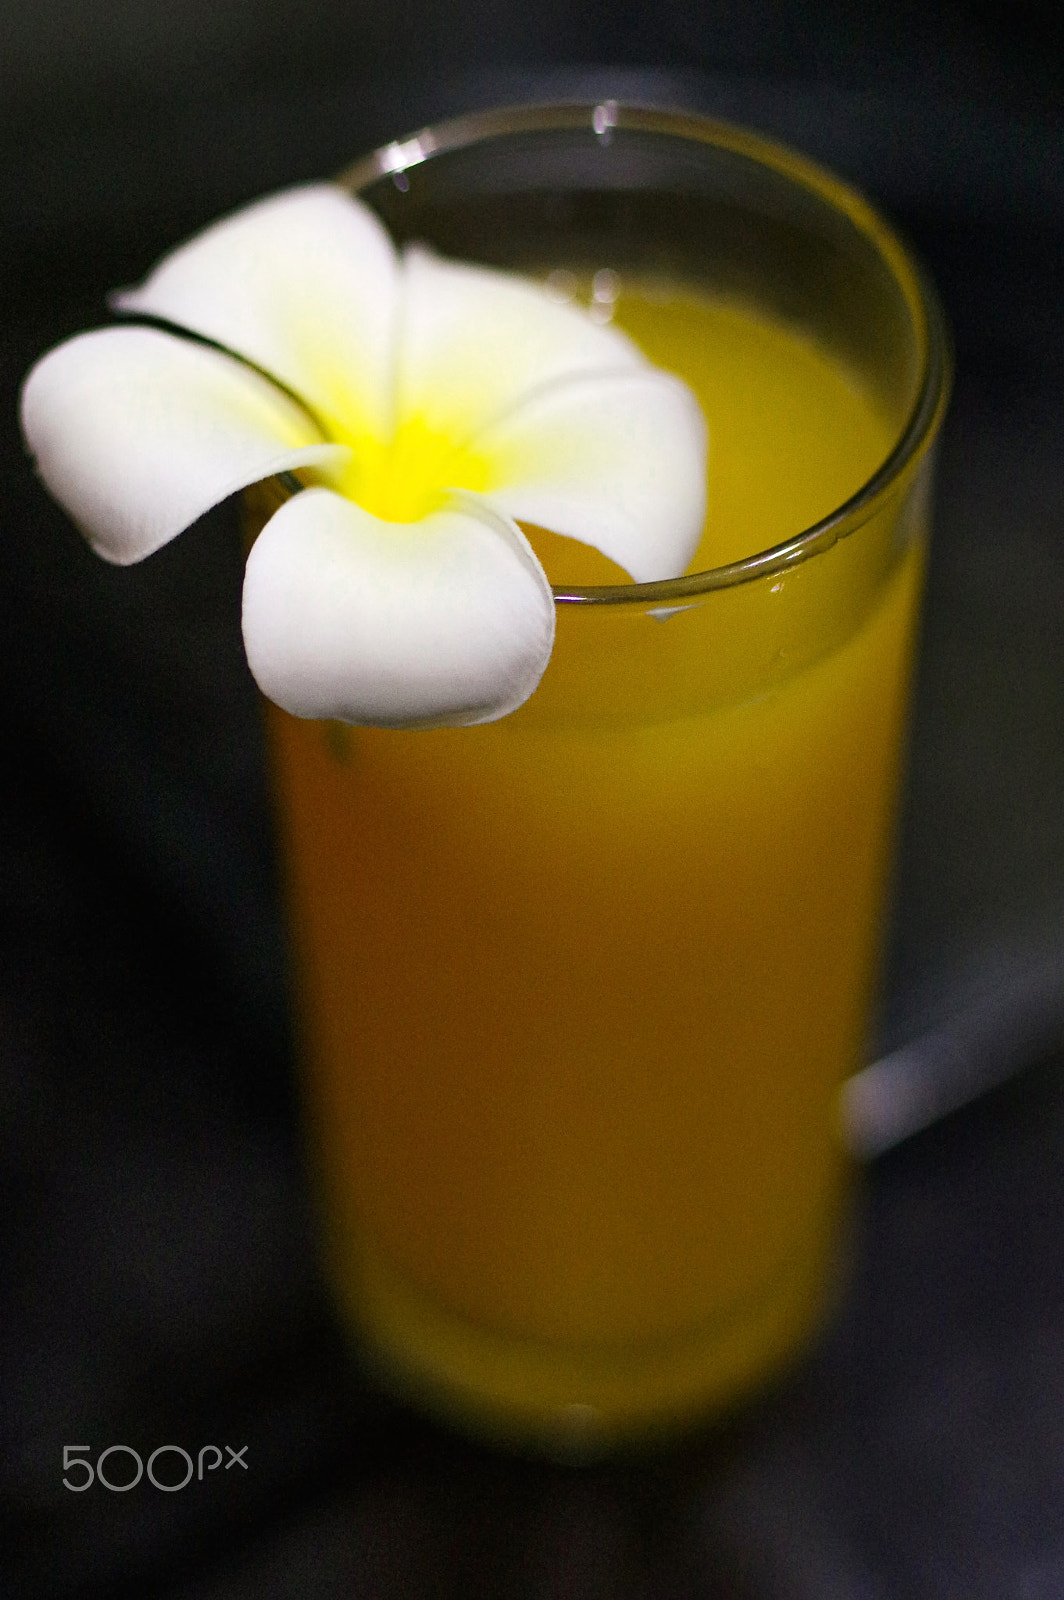 Pentax K-3 sample photo. Freshly squeezed fresh orange juice, close-up with a magnolia bl photography